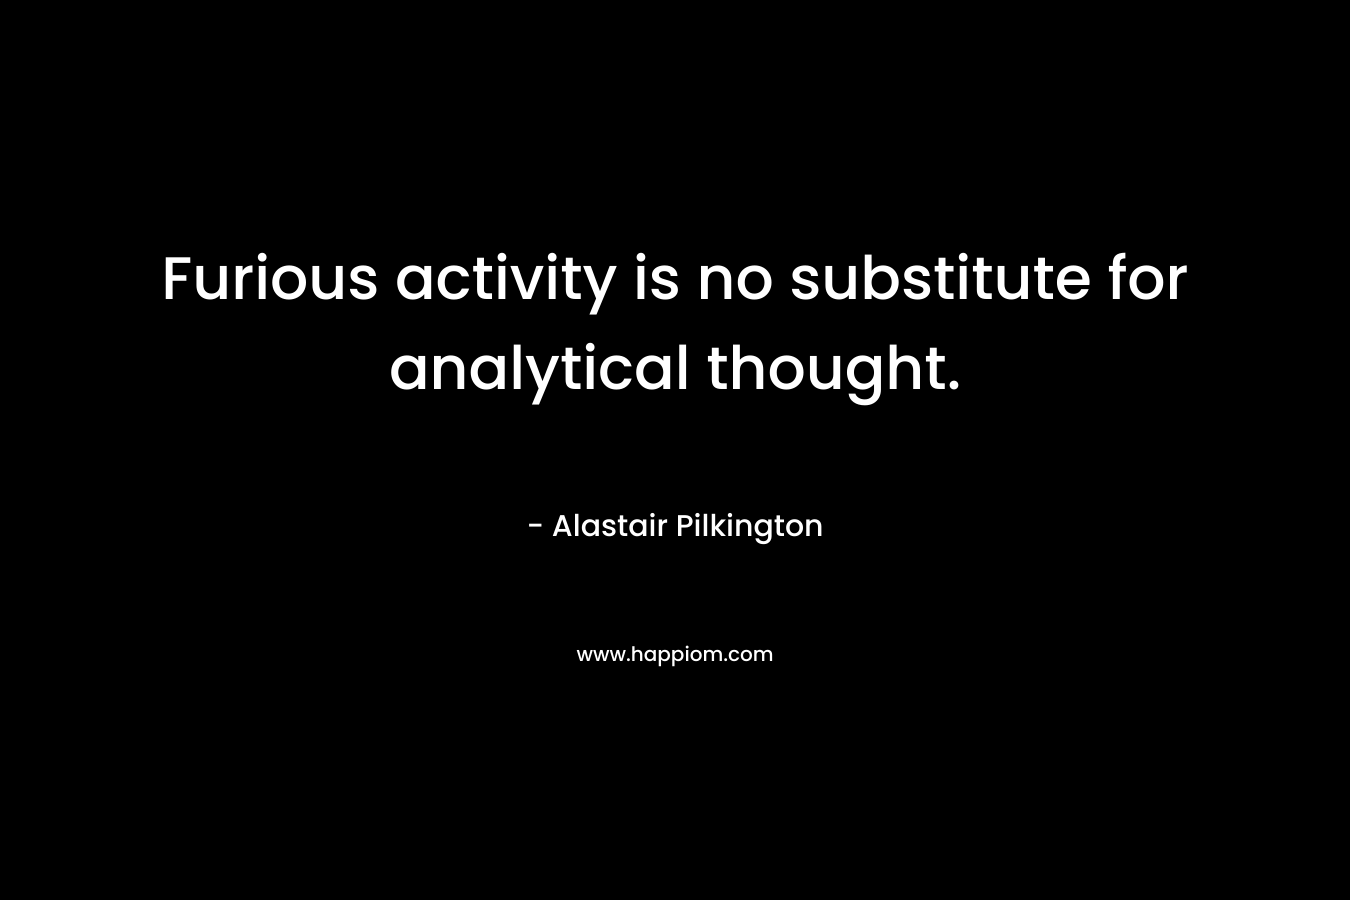 Furious activity is no substitute for analytical thought.